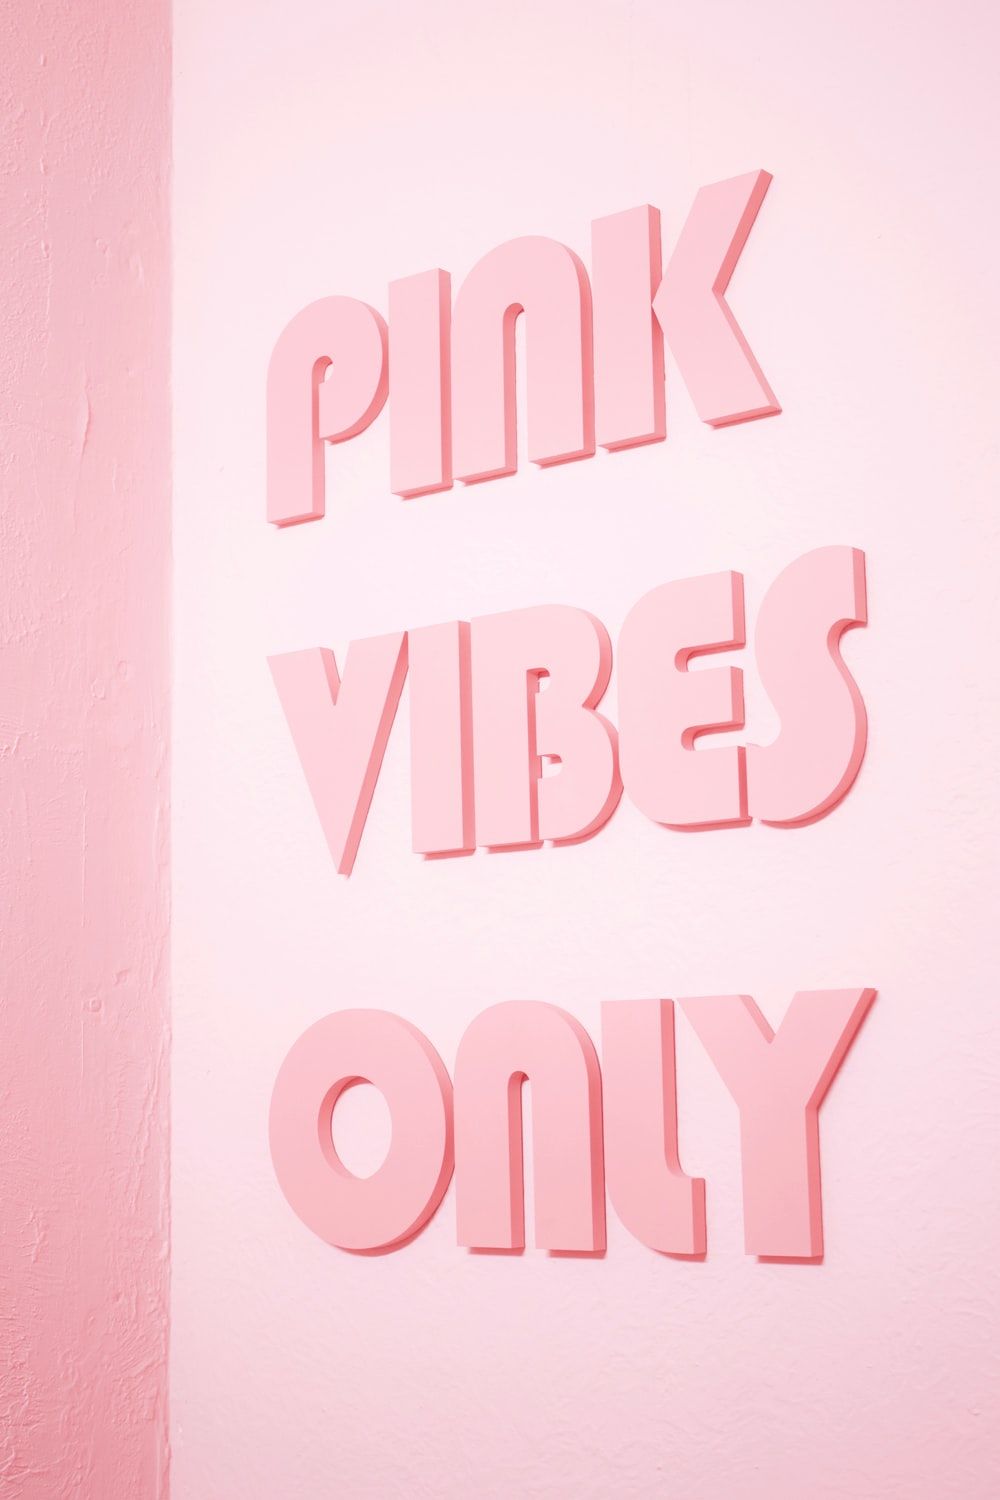 Aesthetic Pink Quotes Wallpapers - Wallpaper Cave